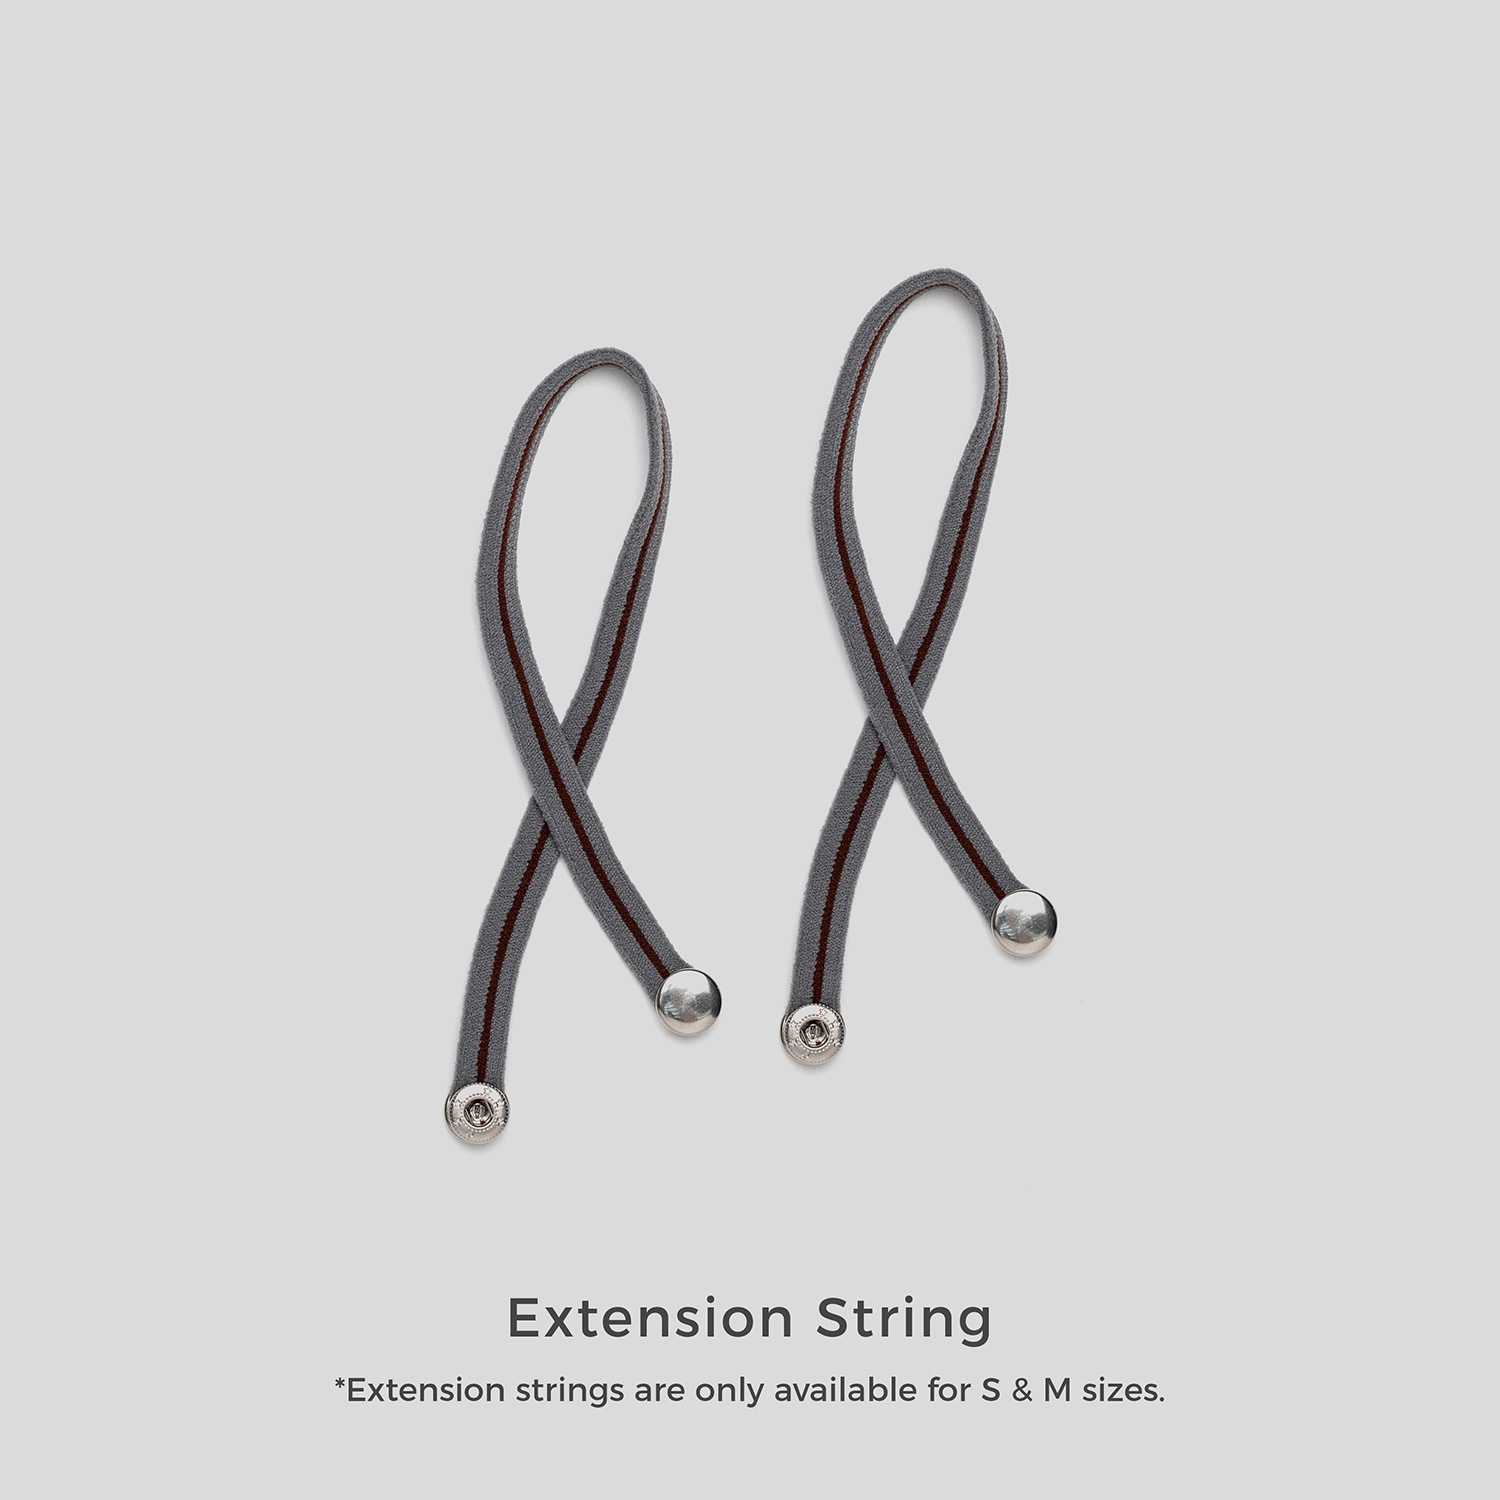 Extension String Frost Grey +RM15.00